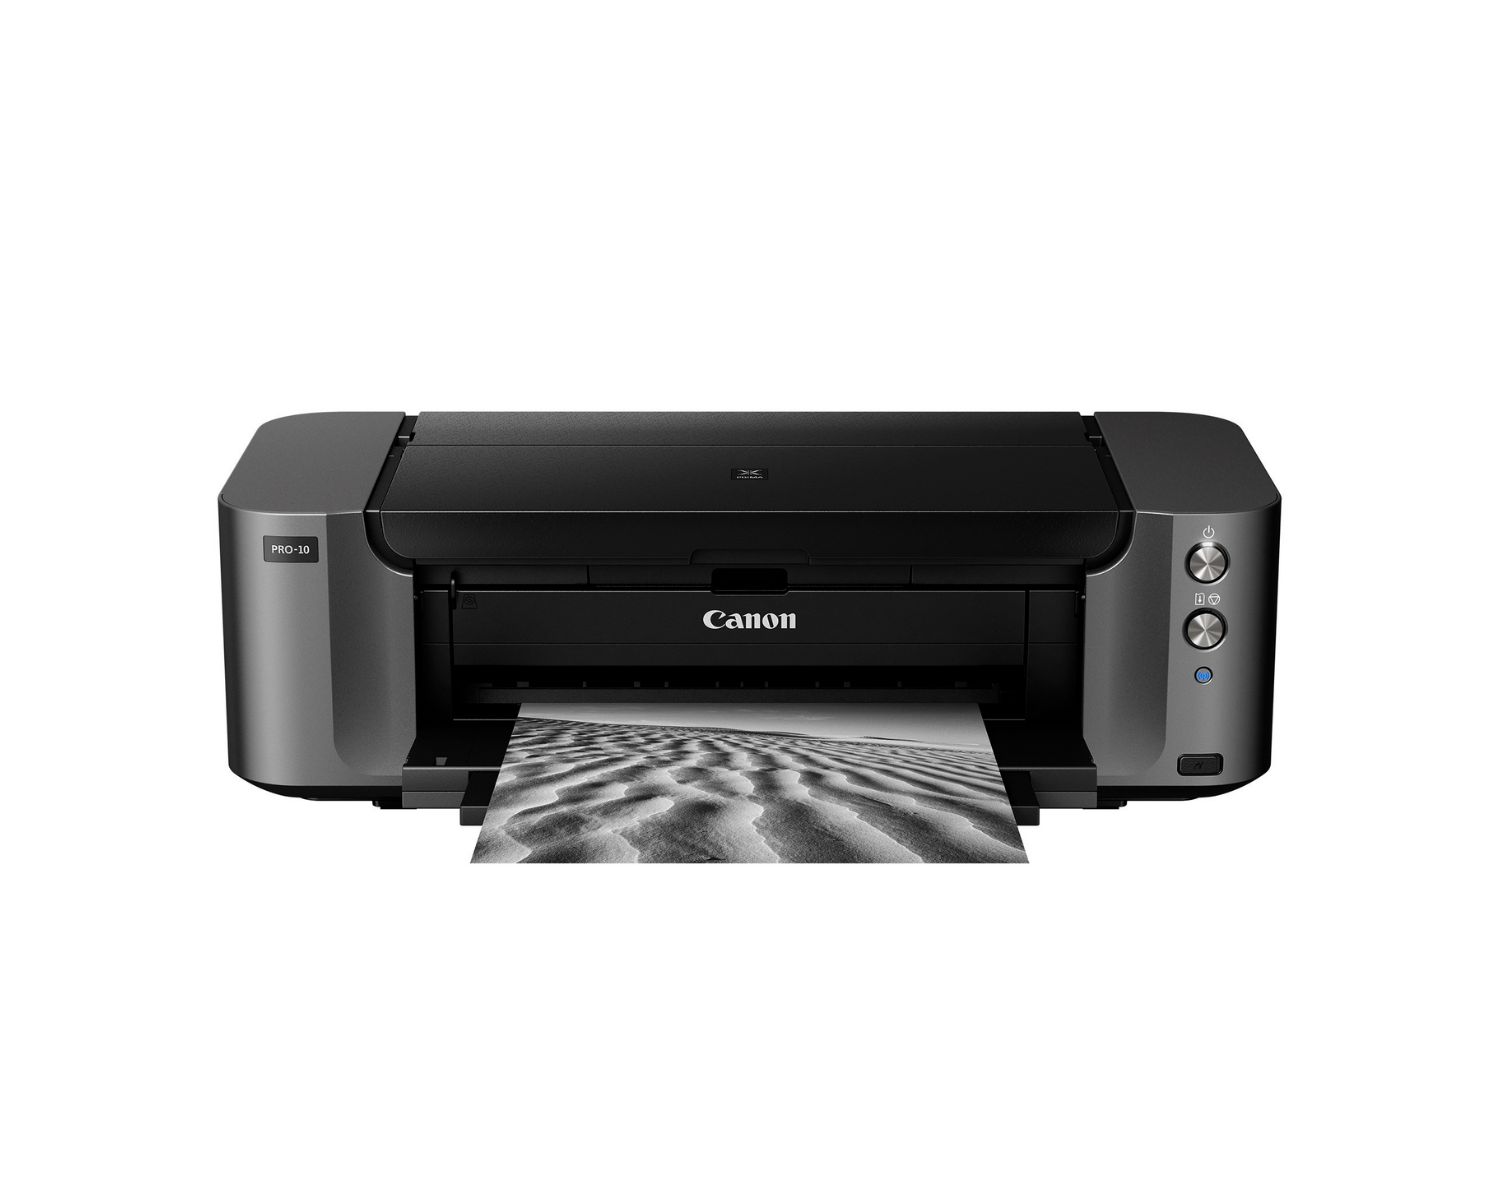 How Do I Connect My Canon Printer To My IPhone